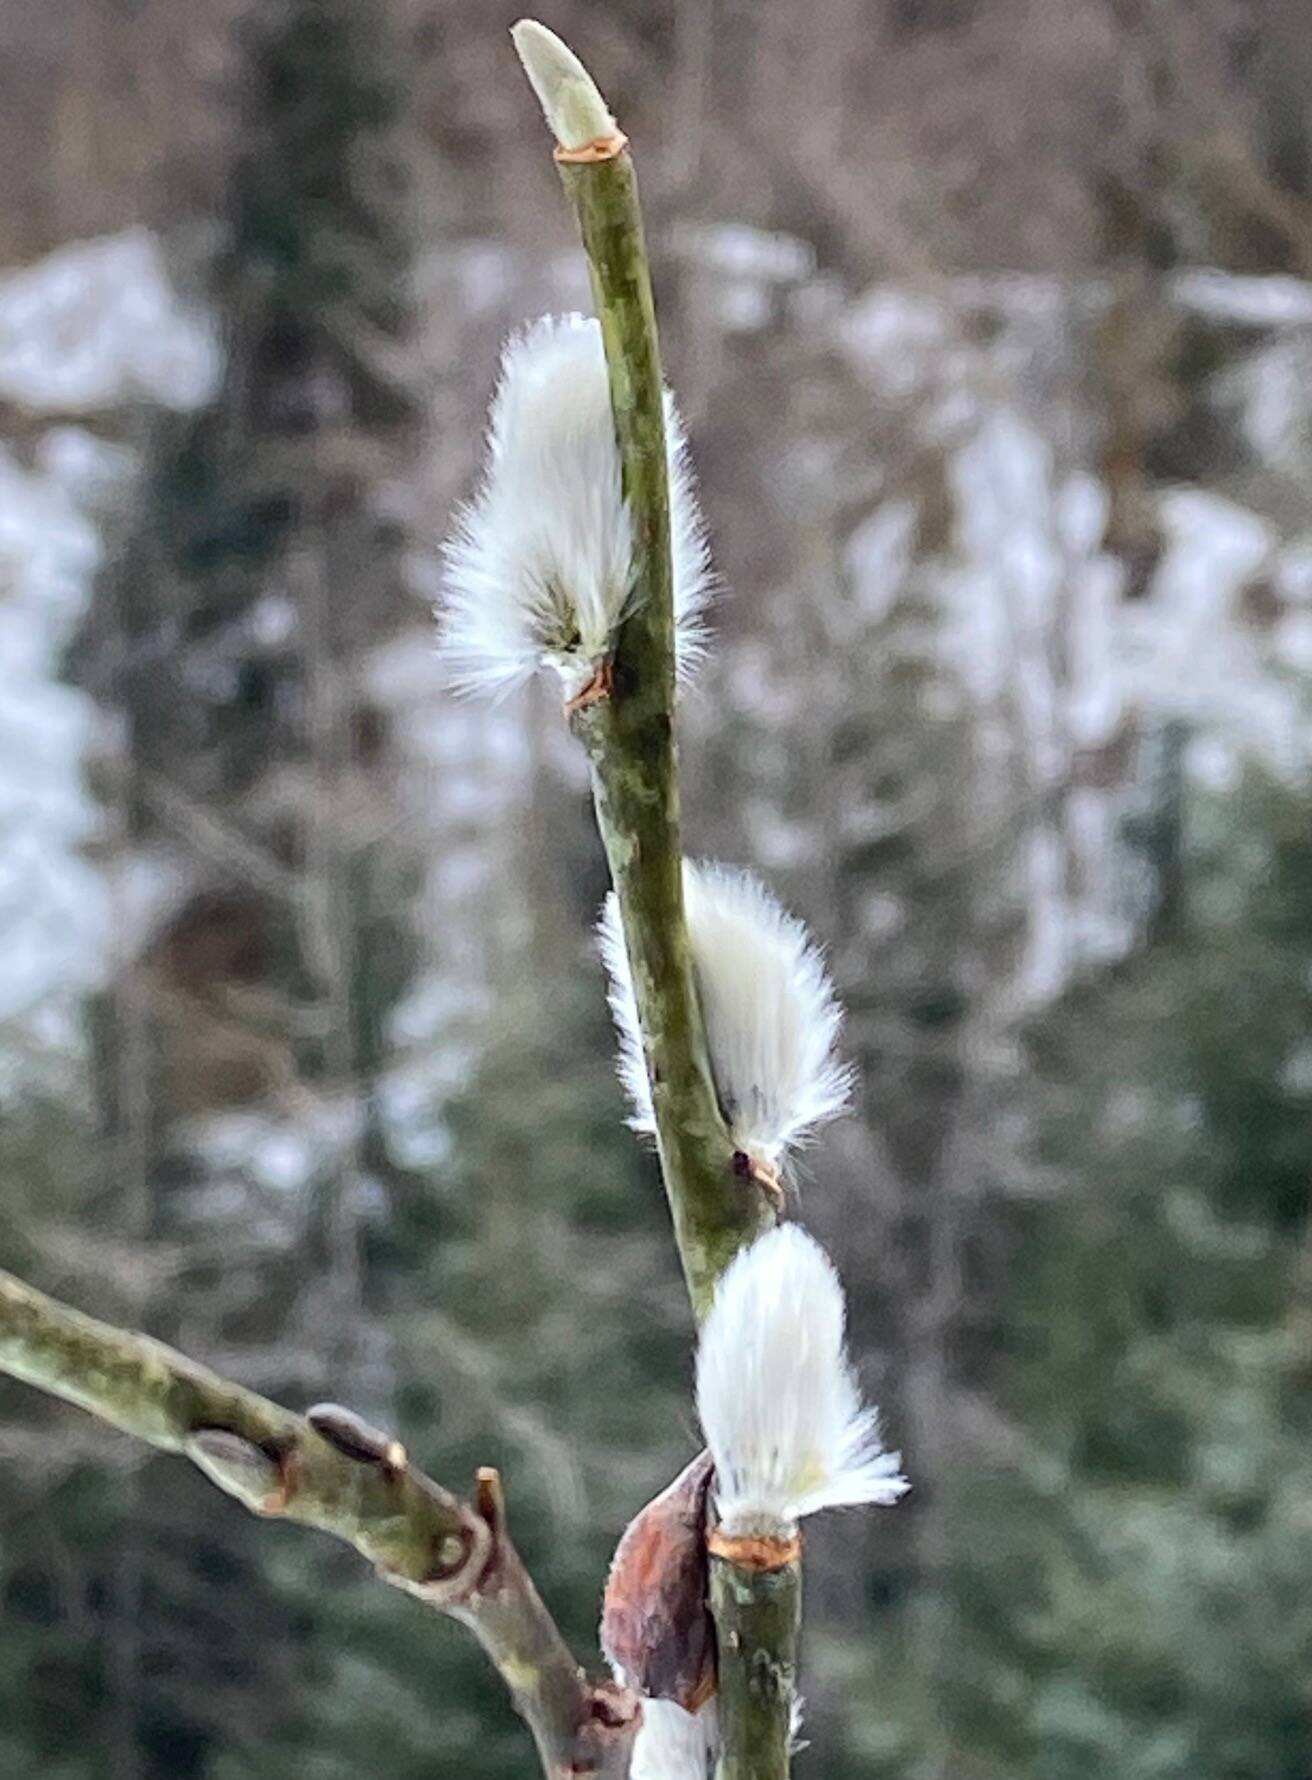 Spring is coming, as evidenced by this pussy willow seen near Mendenhall Glacier. (Courtesy Photo / Denise Carroll)